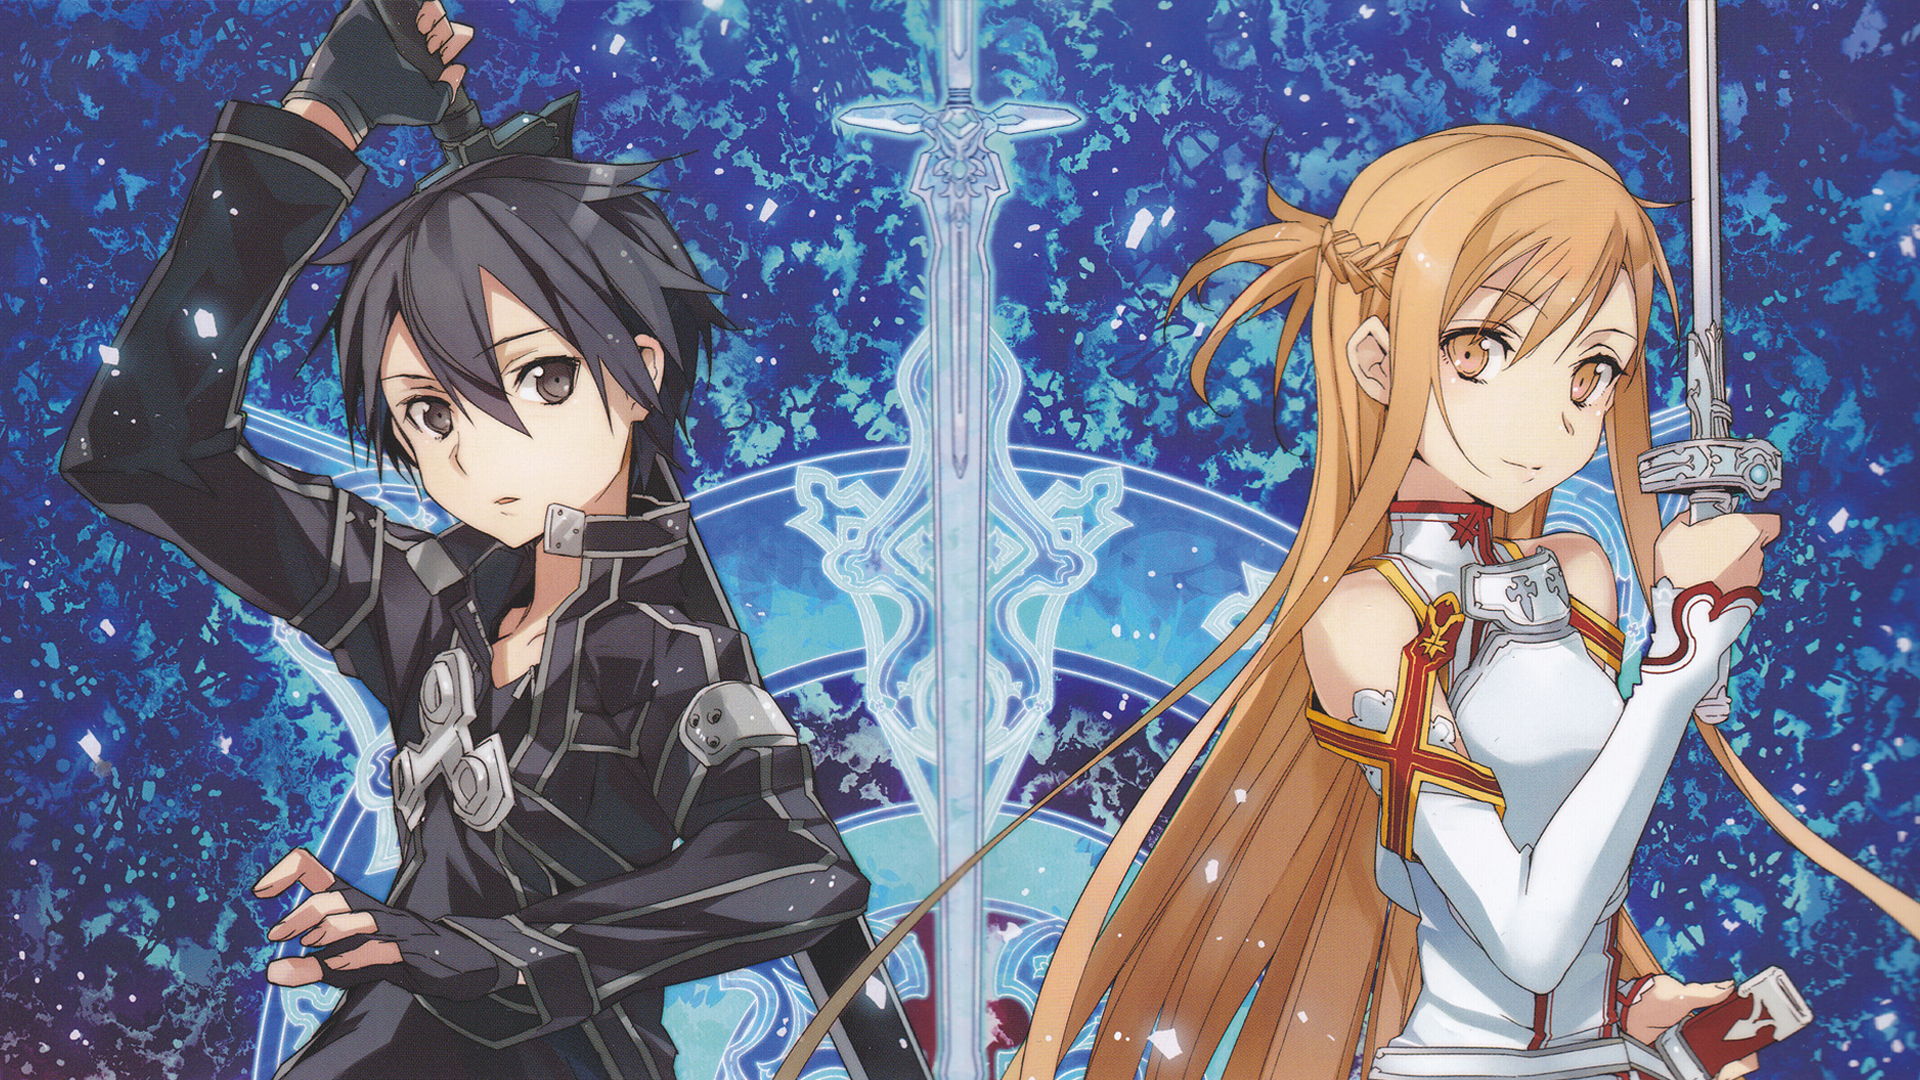 Geek insider, geekinsider, geekinsider. Com,, are virtual reality massive multi-player games, like sword art online, really possible? , gaming